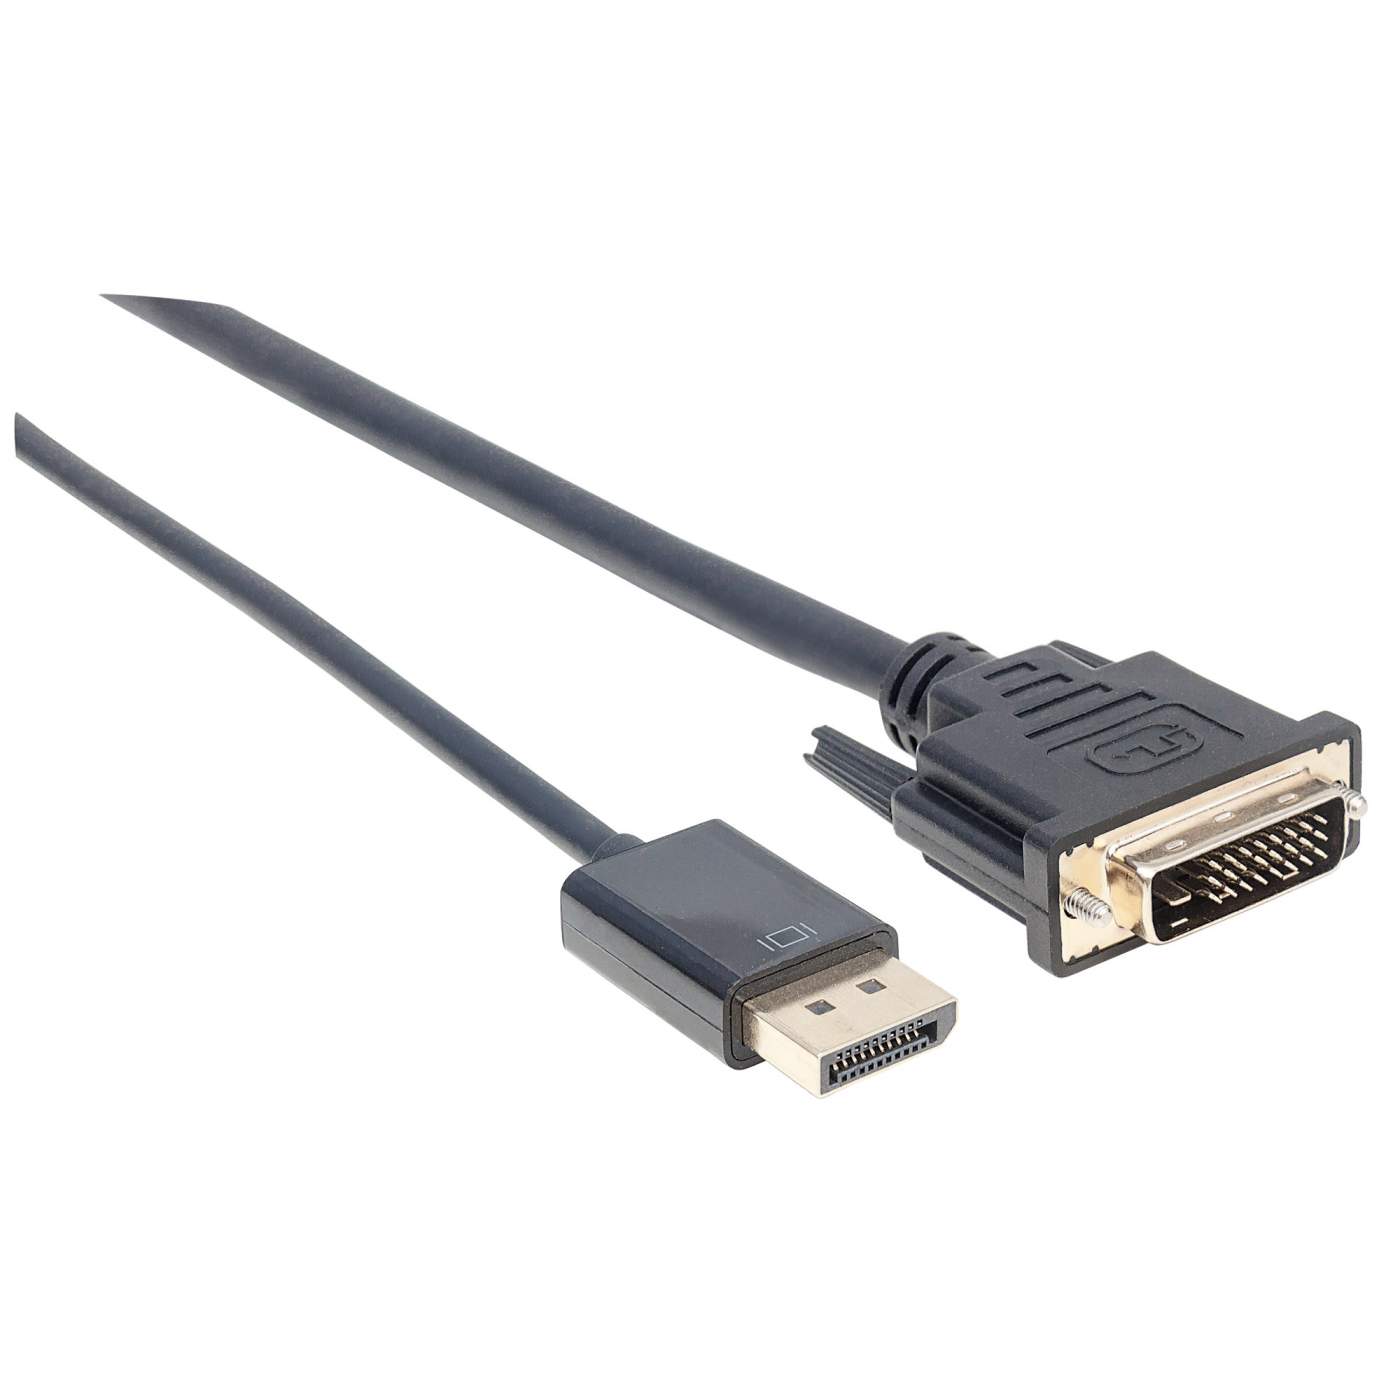 DisplayPort 1.2a to DVI Cable Image 3